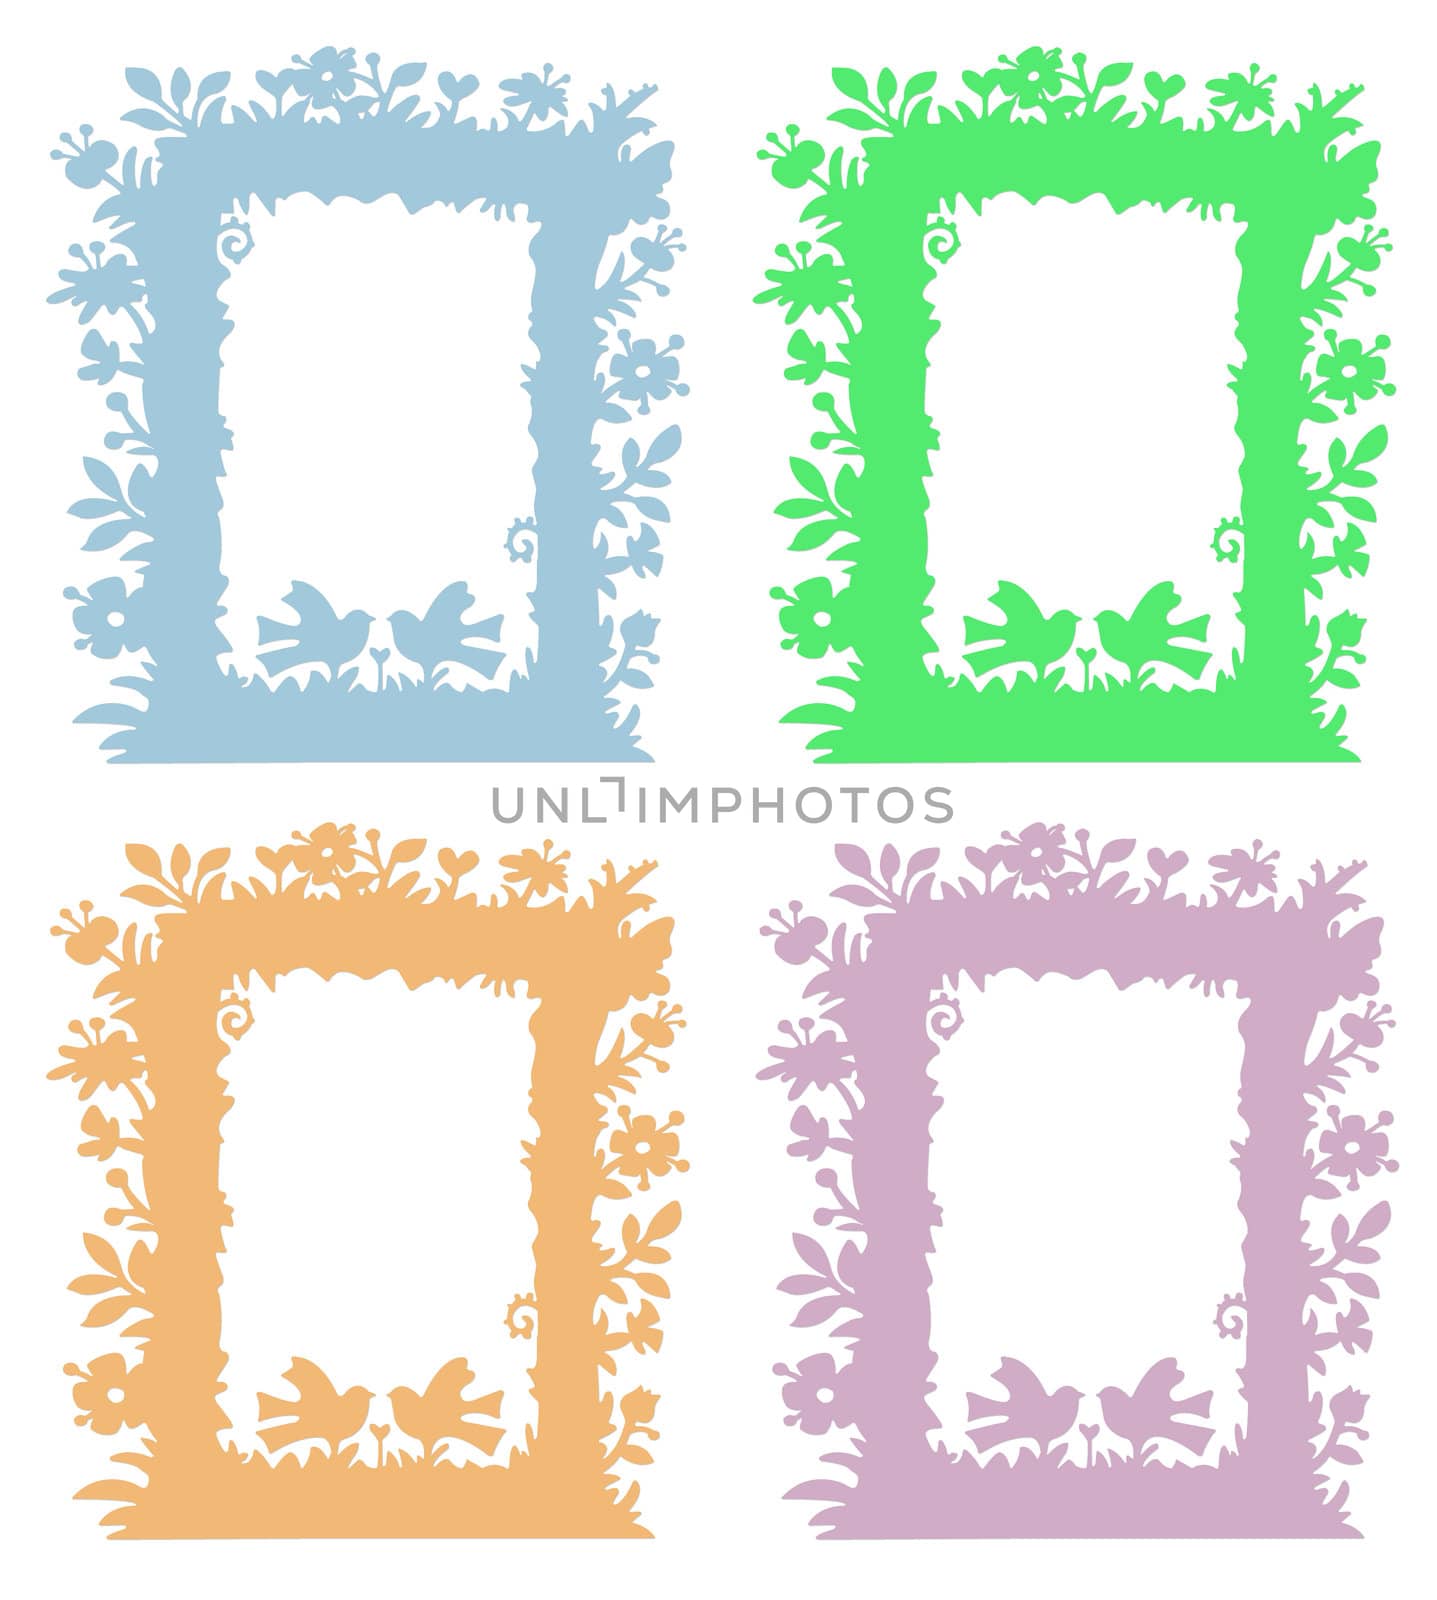 collection of flower frame isolated on white background